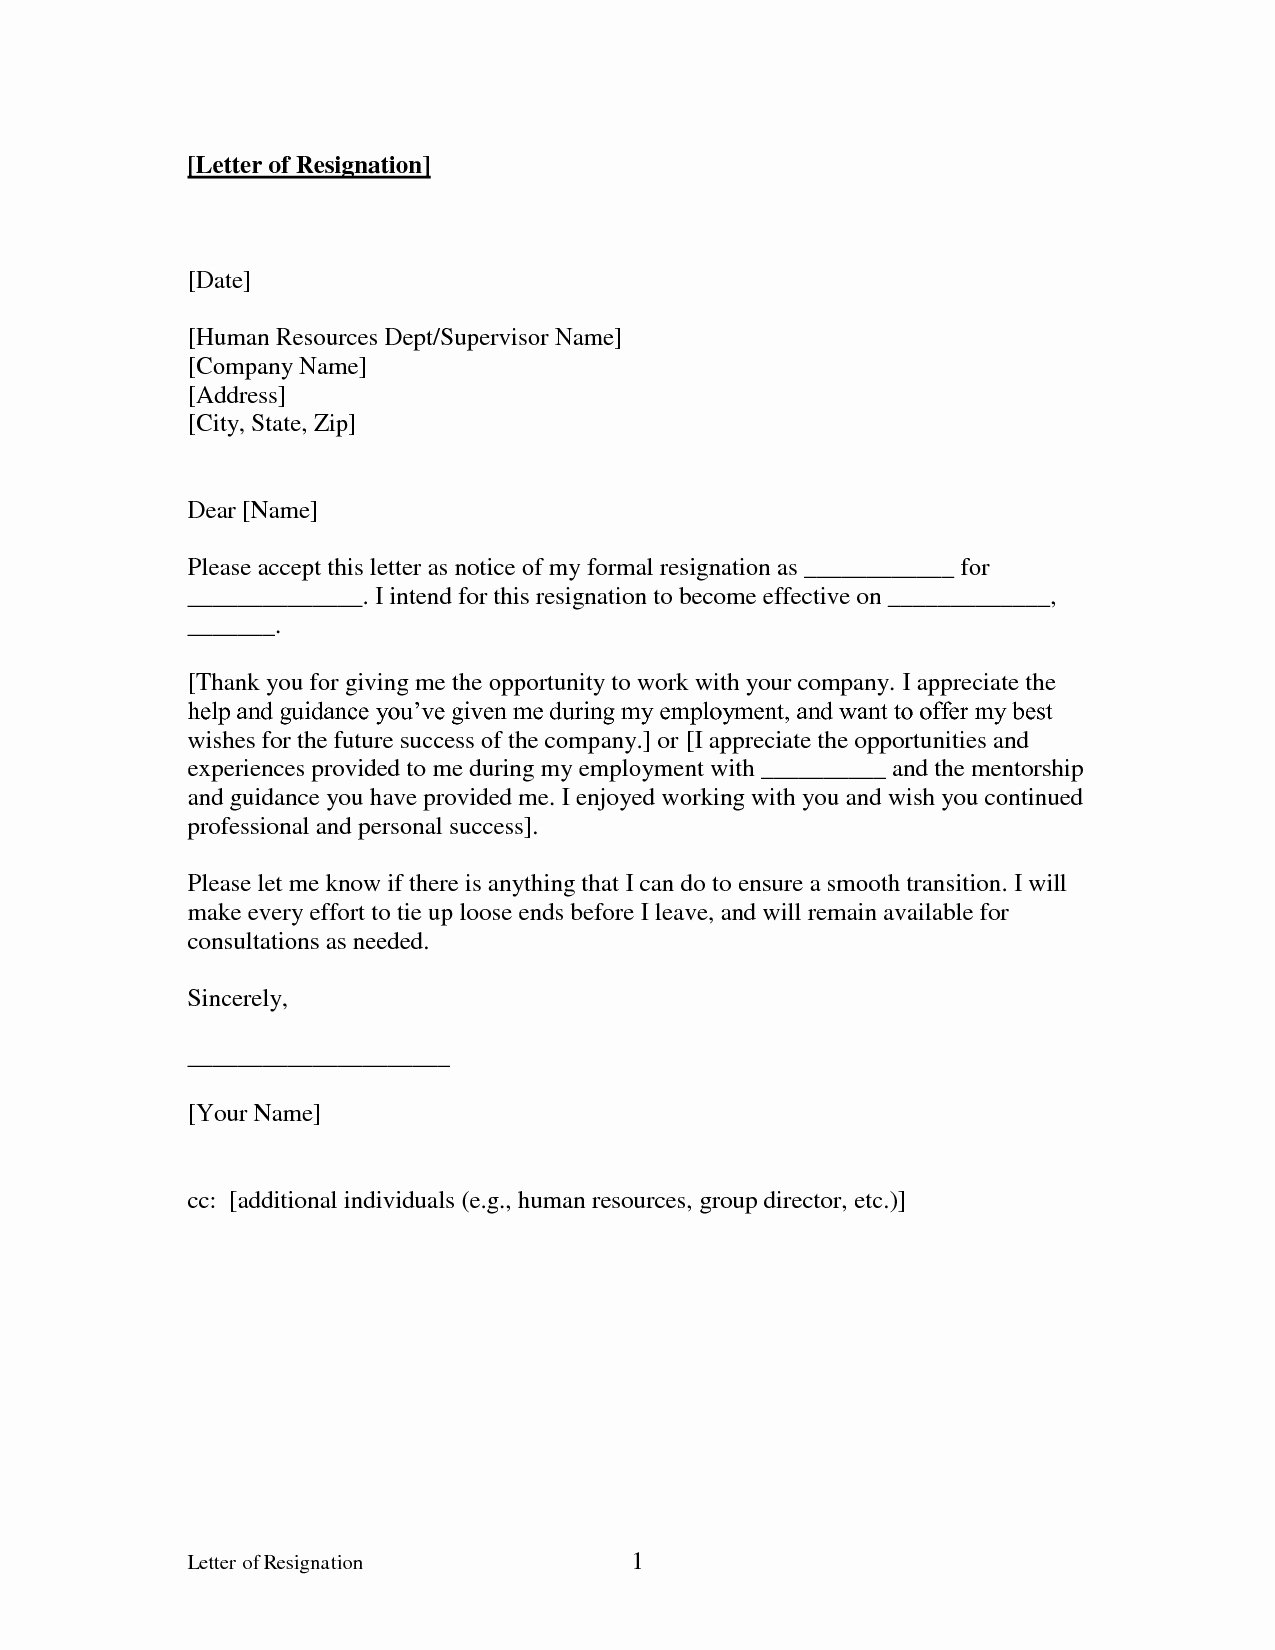 Real Estate Agent Introduction Letter Fresh Real Estate Introduction Letter to Friends Template